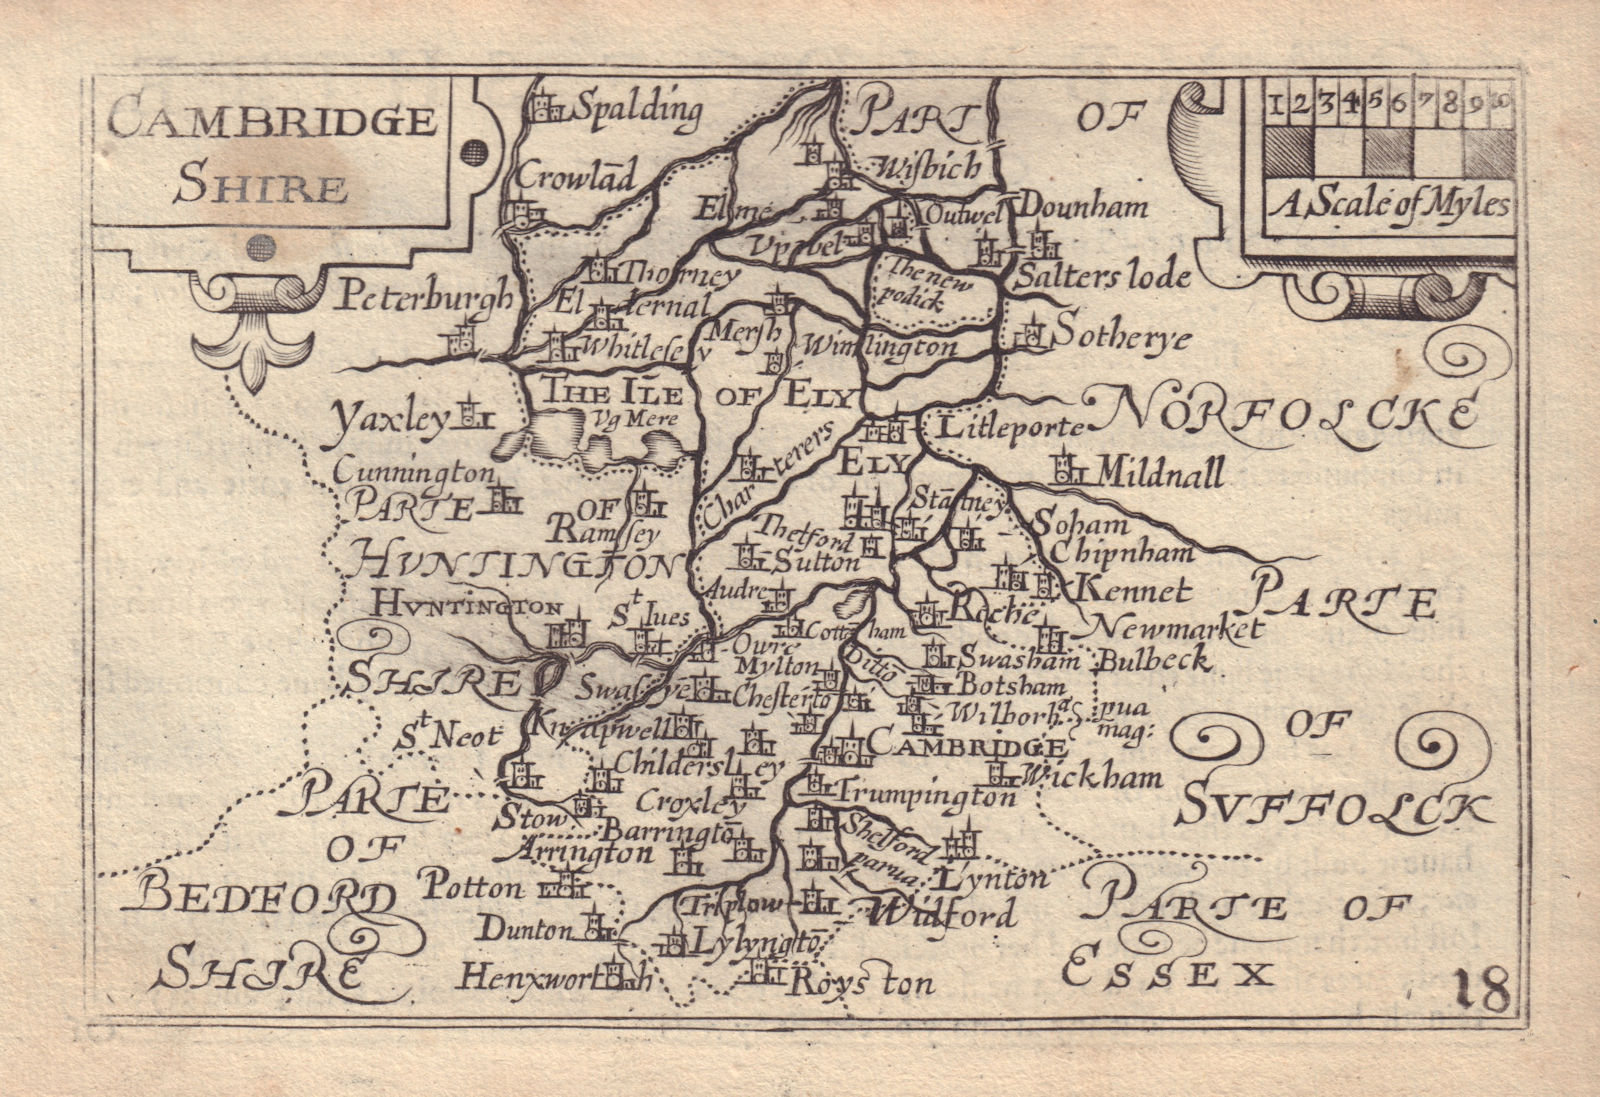 Associate Product Cambridge Shire by Keere. "Speed miniature" Cambridgeshire county map 1632